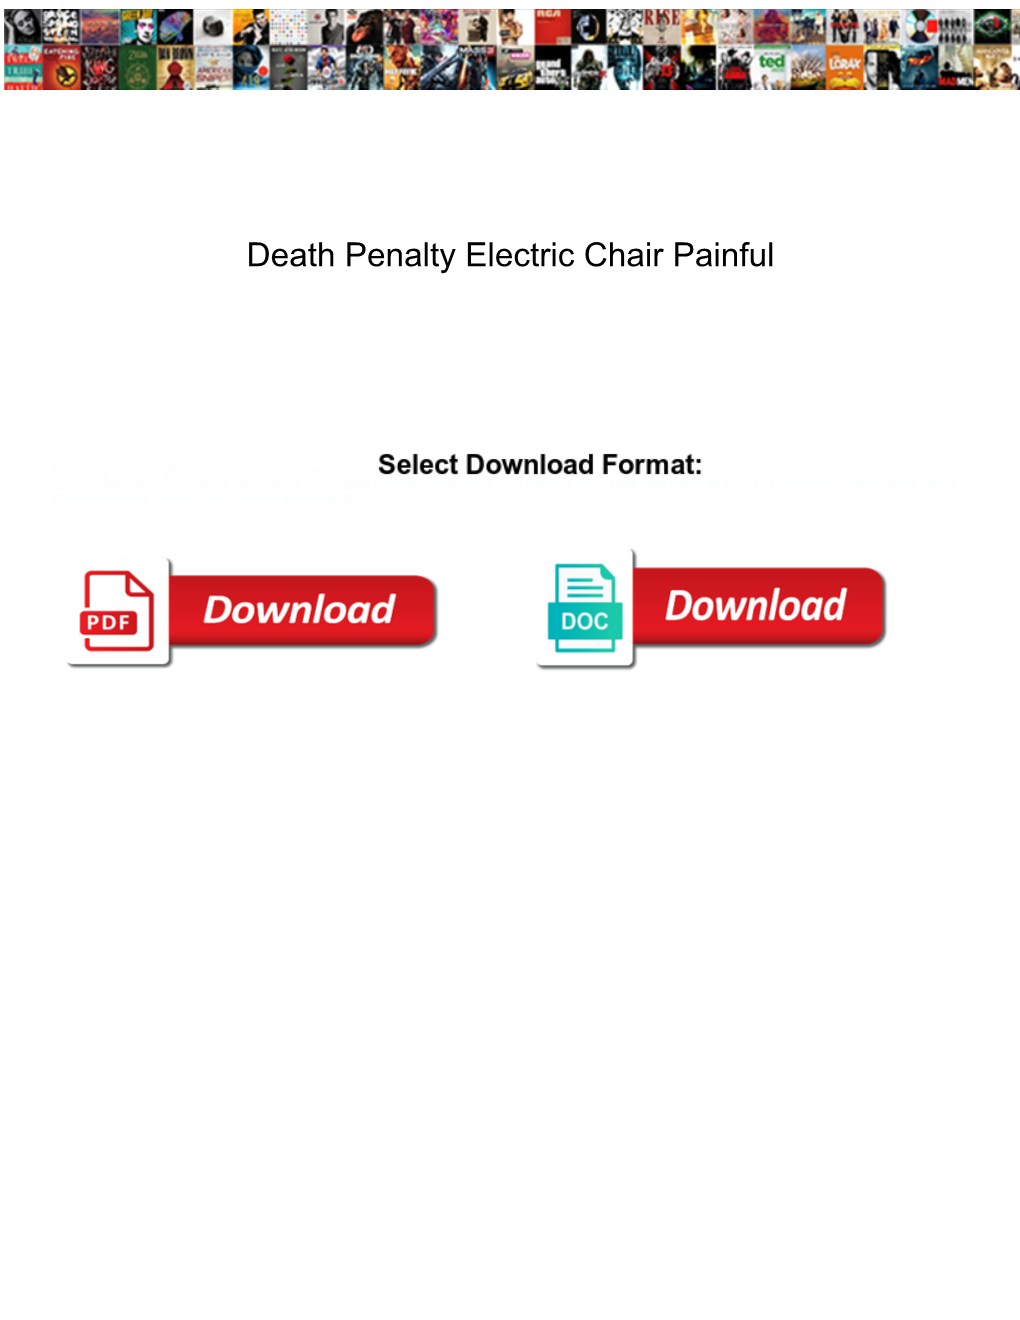 Death Penalty Electric Chair Painful Dvdarw